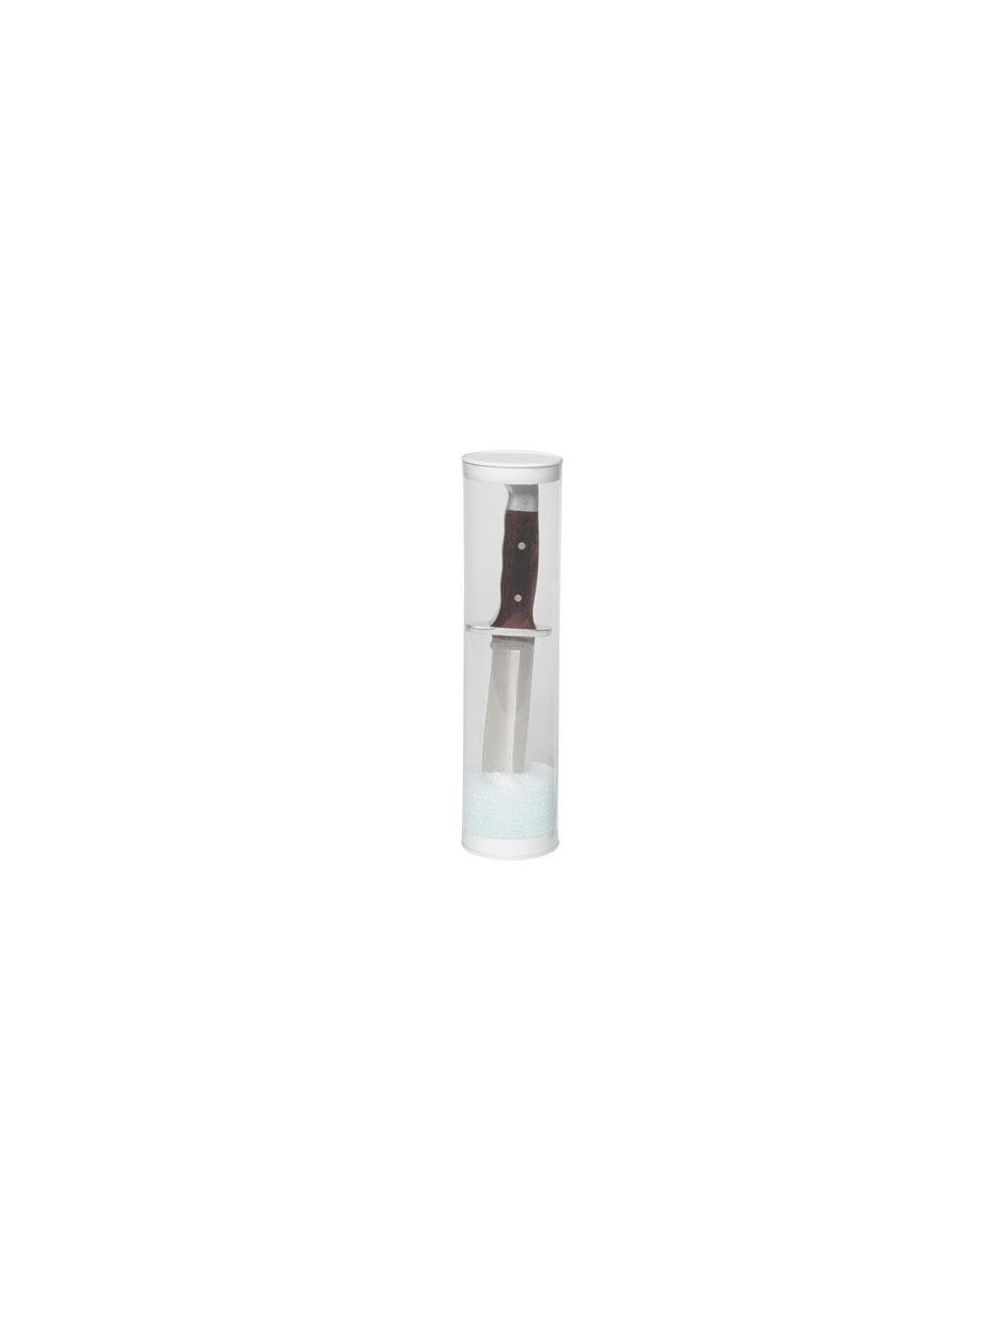 Evidence Collection Tube (3'' x 12'') - Set of 8